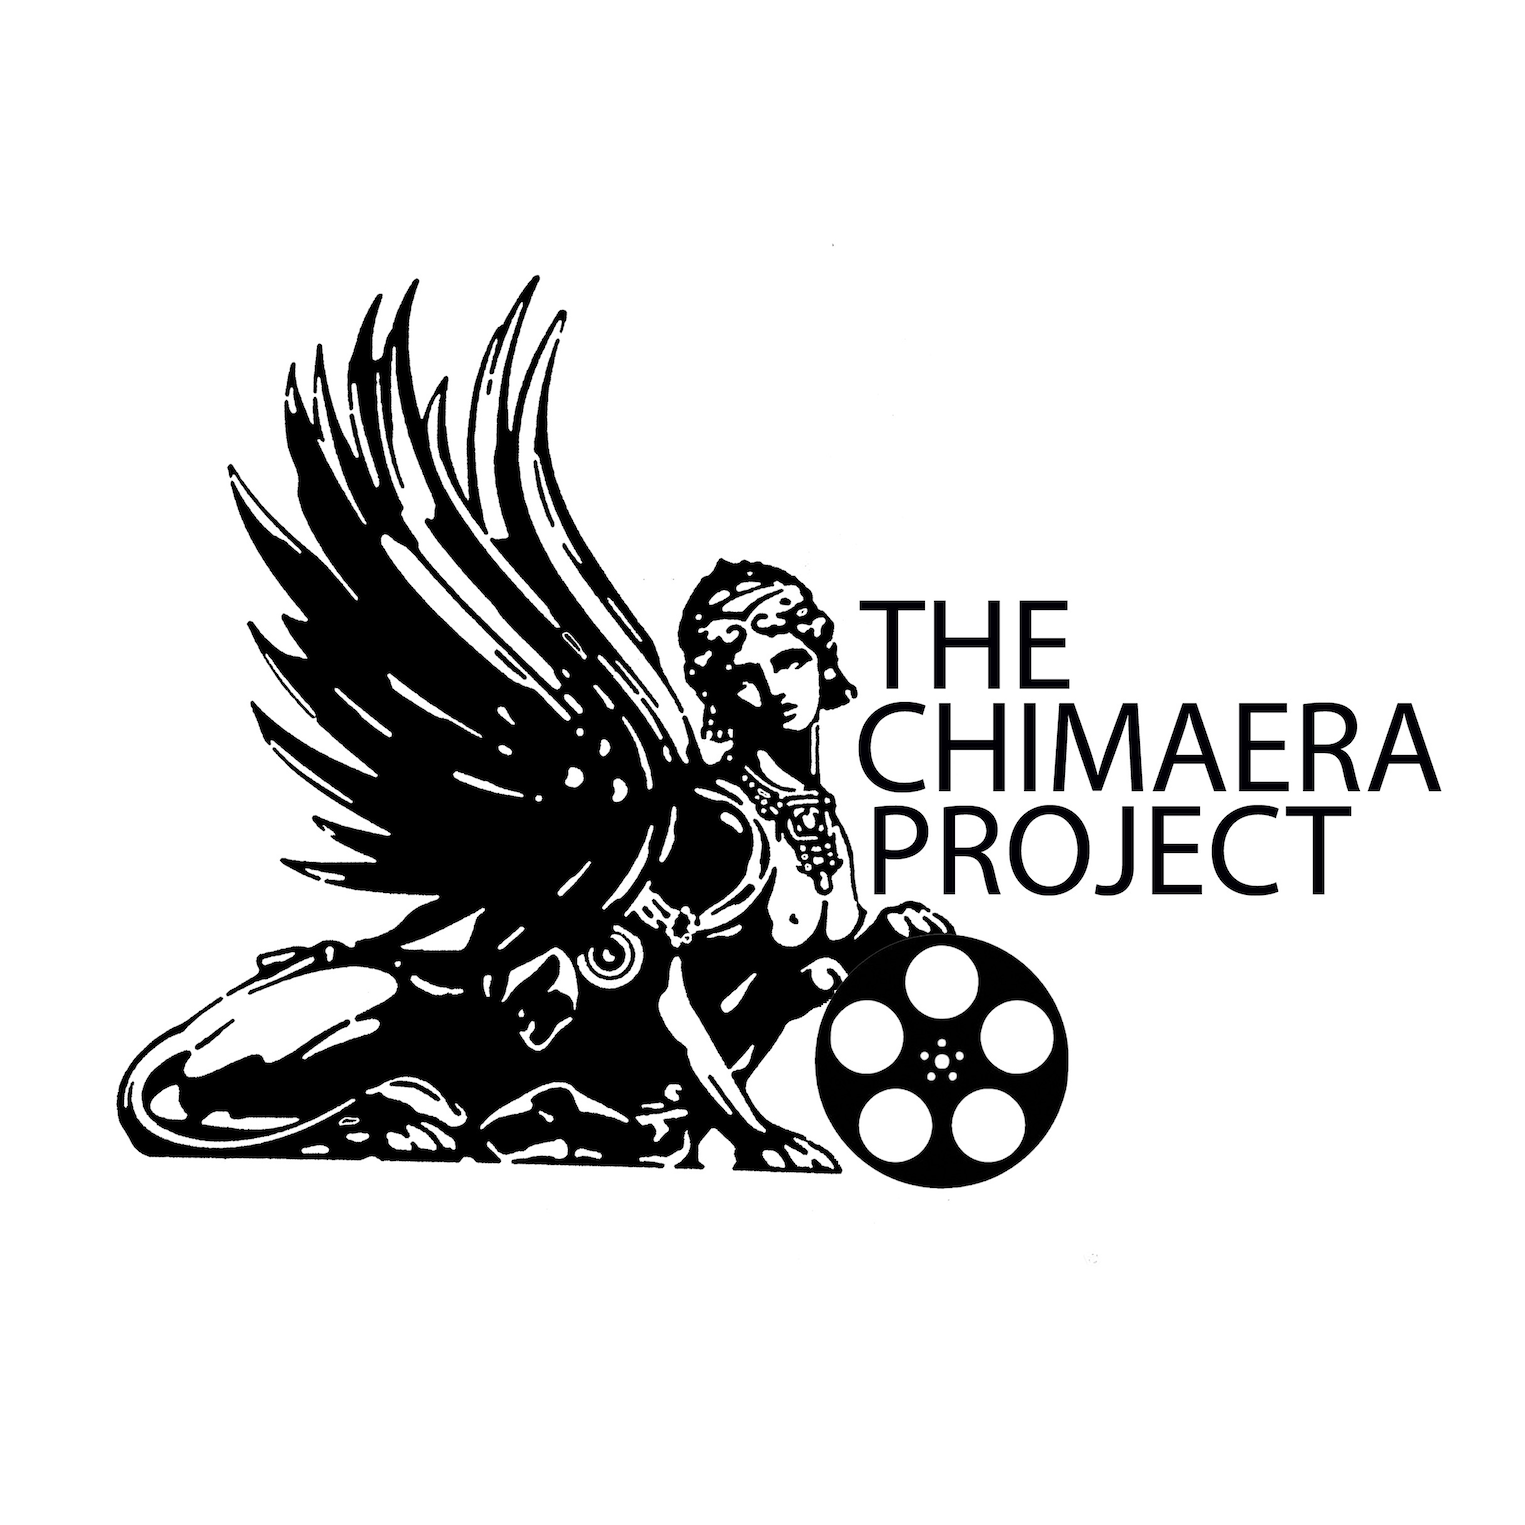 The Chimaera Project